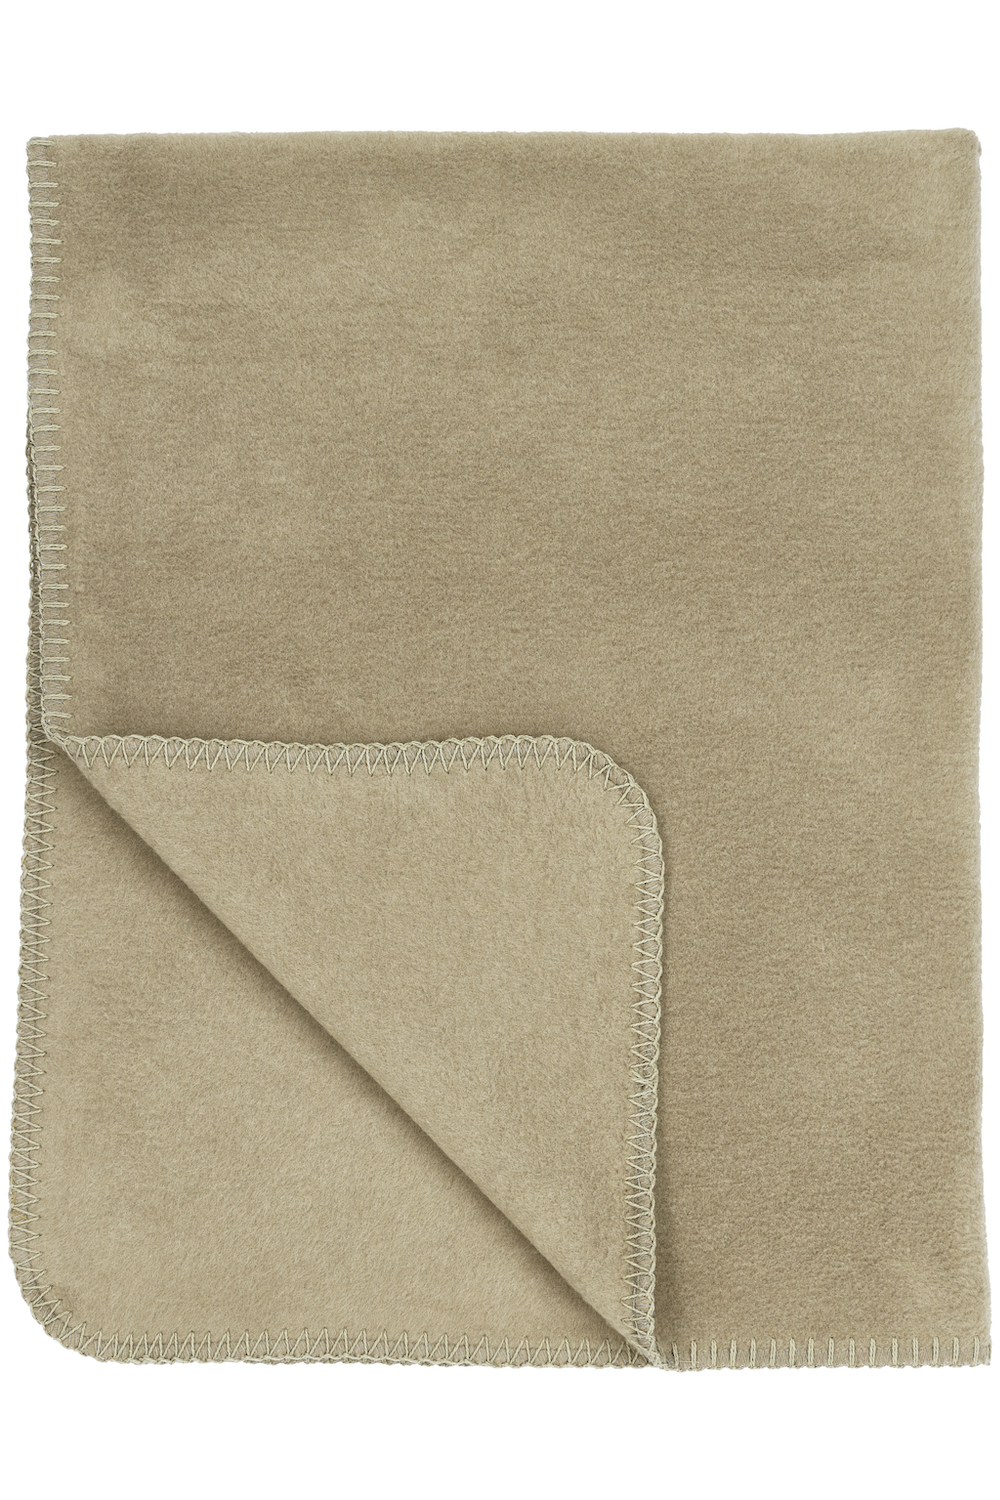 Cot Bed Blanket Uni - Taupe - 100x150cm